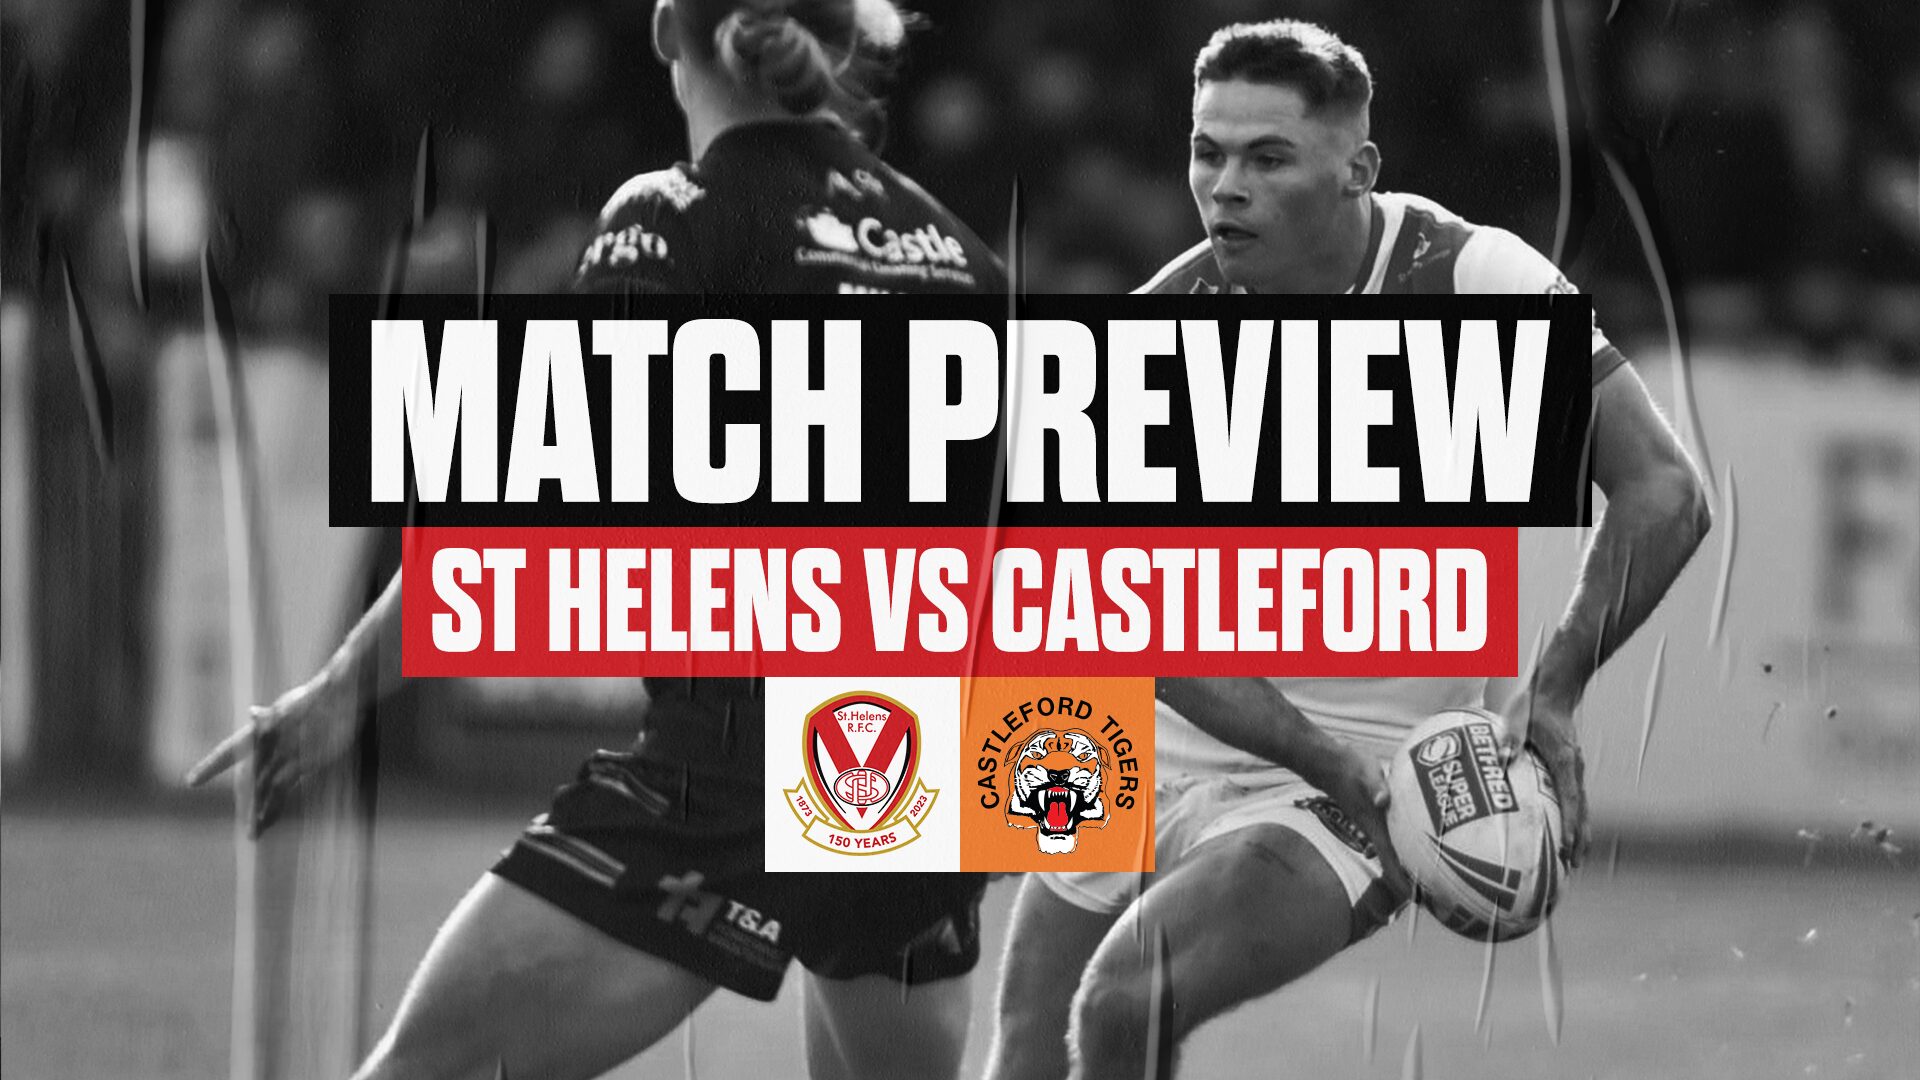 Match Preview Castleford Tigers (H) St.Helens R.F.C.